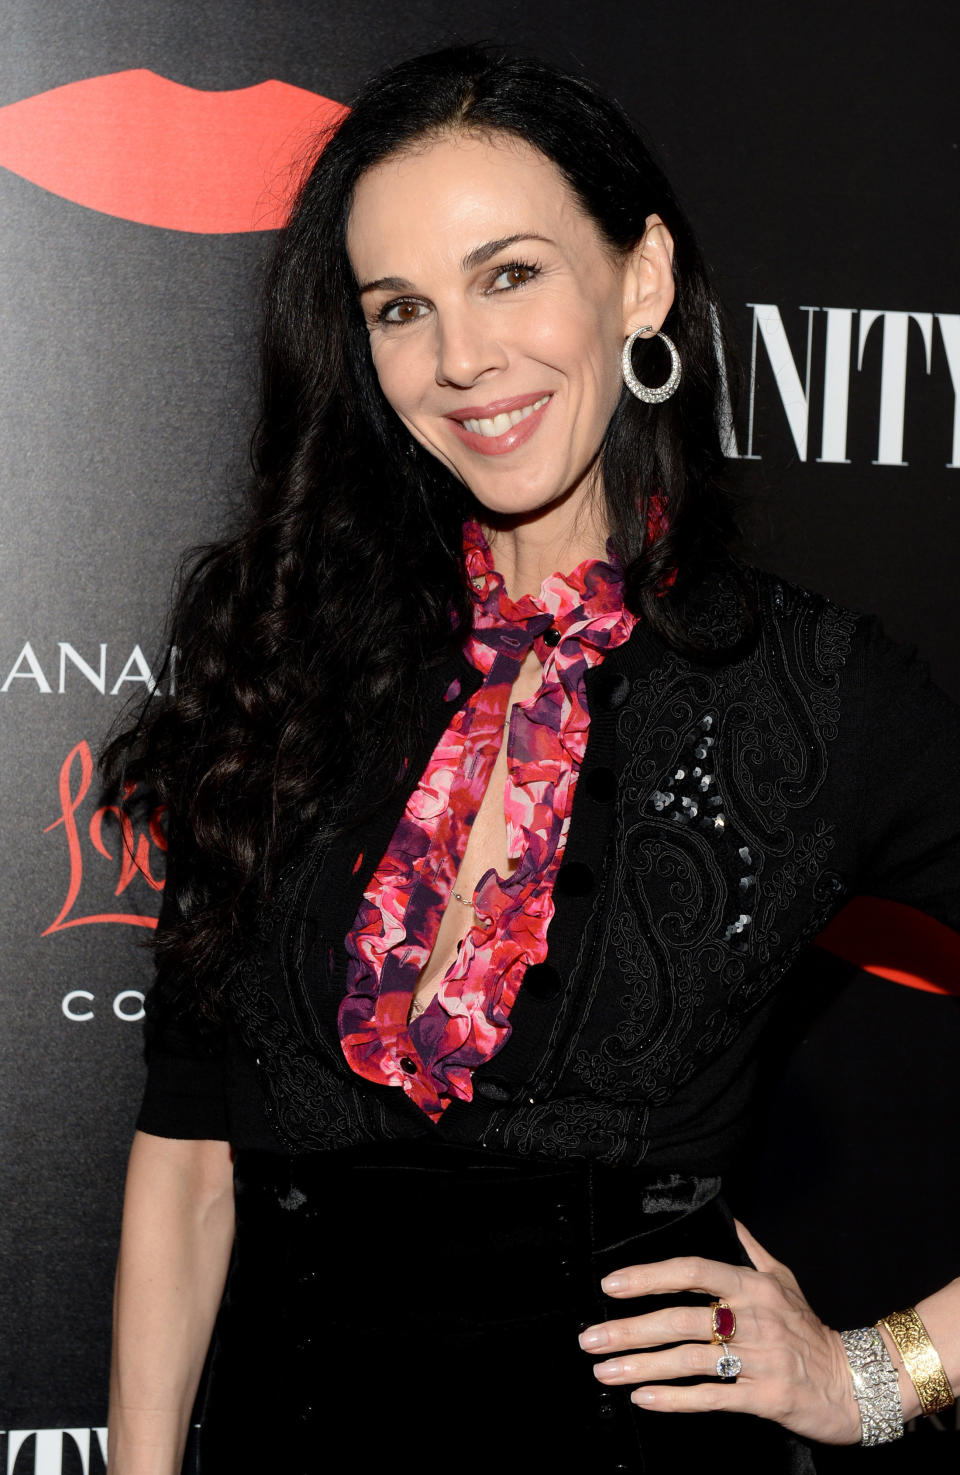 L'Wren Scott, fashion designer and Rolling Stones frontman Mick Jagger's longtime girlfriend, <a href="http://www.huffingtonpost.com/2014/03/17/lwren-scott-dead_n_4979957.html" target="_blank">was found dead in NYC on March 17, 2014</a> of an apparent suicide. 